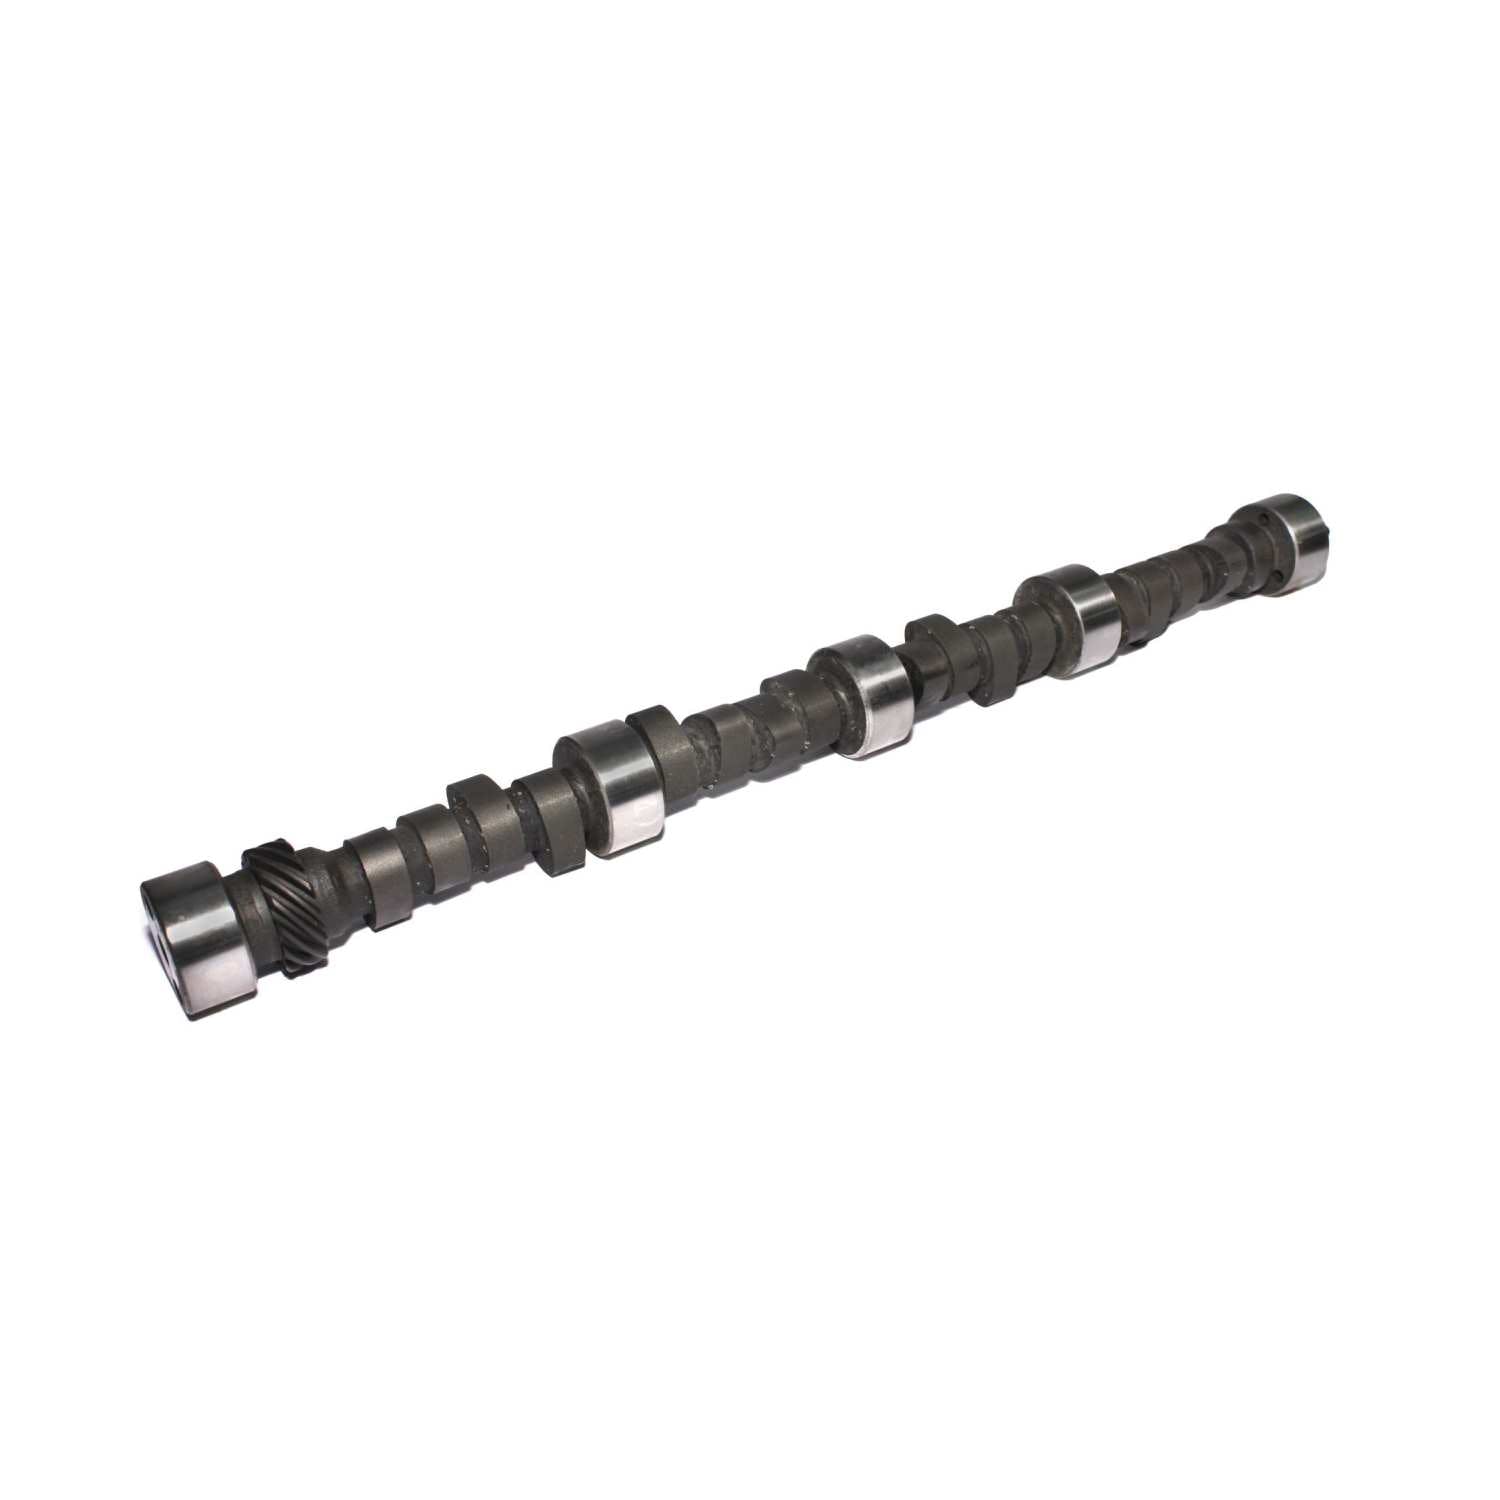 Competition Cams 11-683-47 Drag Race 4/7 Swap Firing Order Camshaft